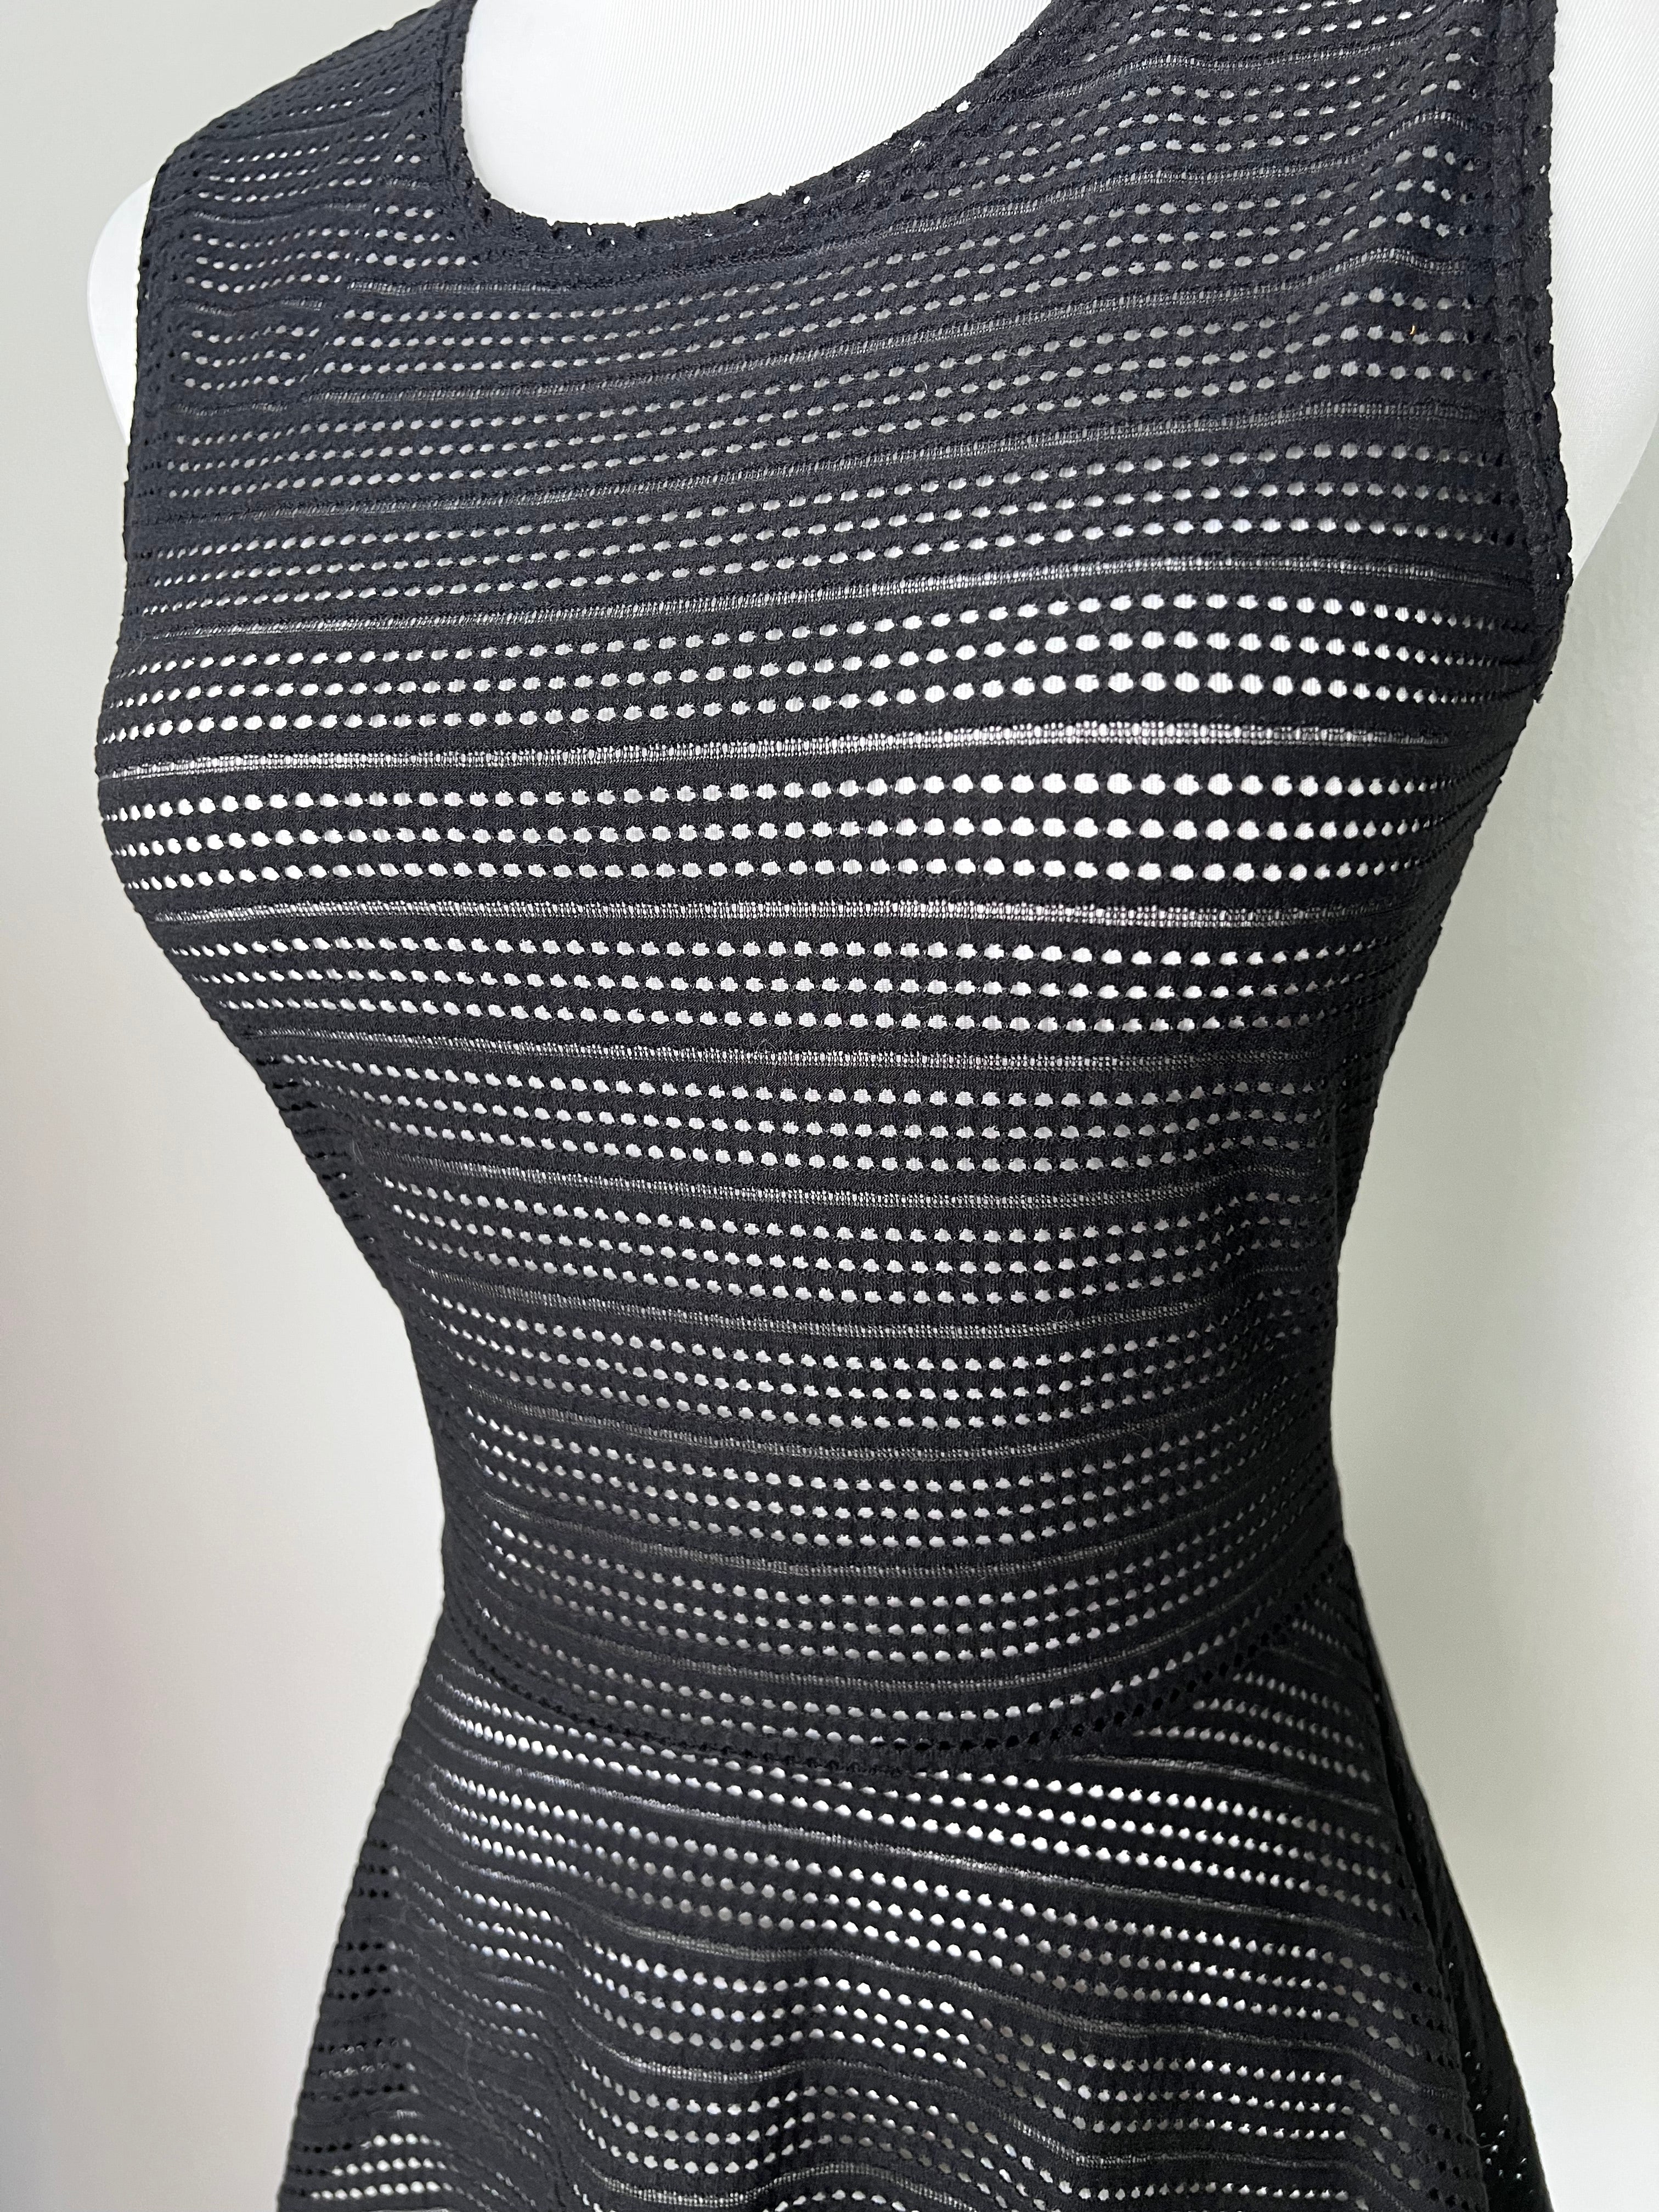 Black sleeveless  top with hole detailing throughout. -BCBGMAXAZRIA